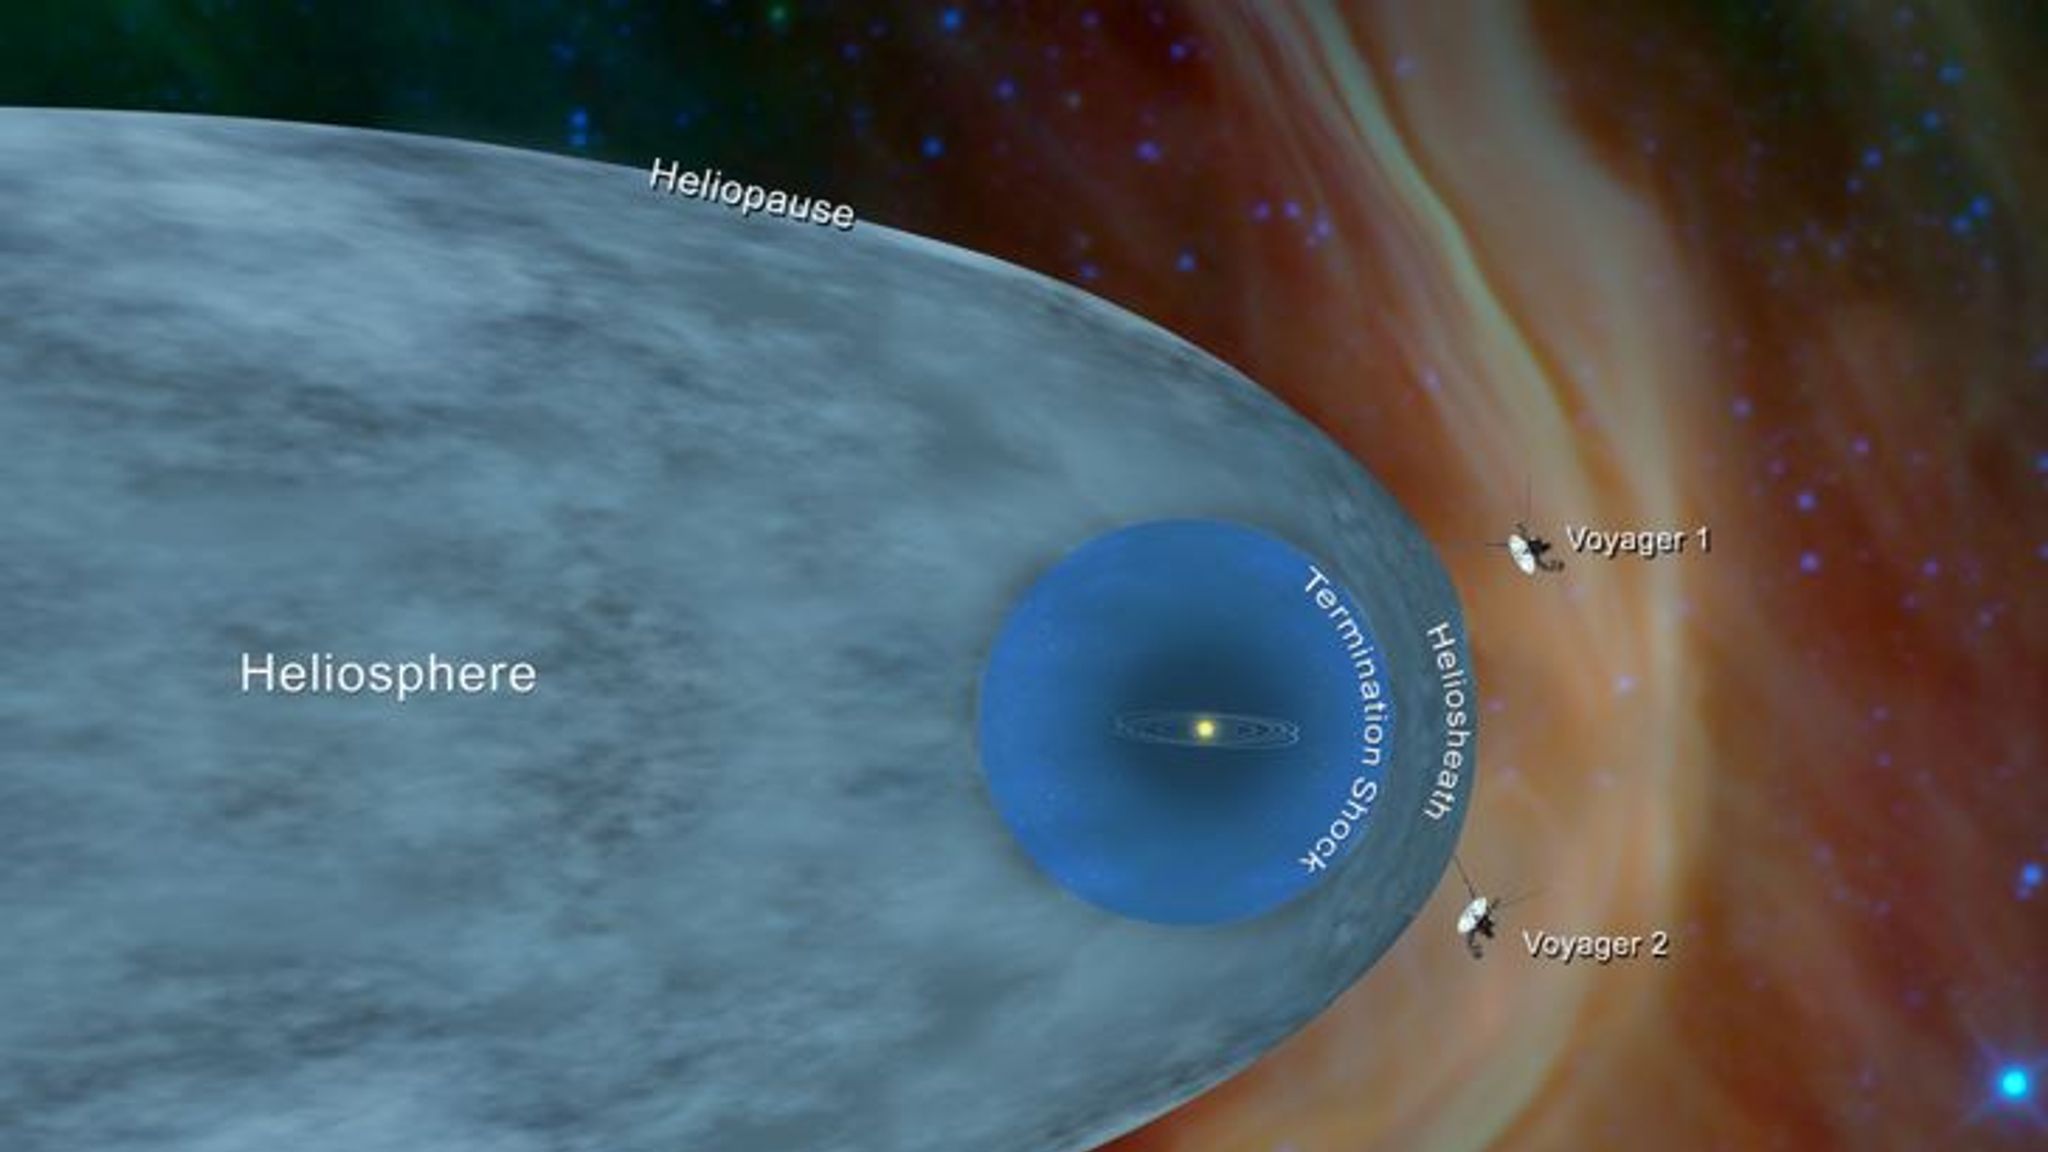 where are the voyager 2 now